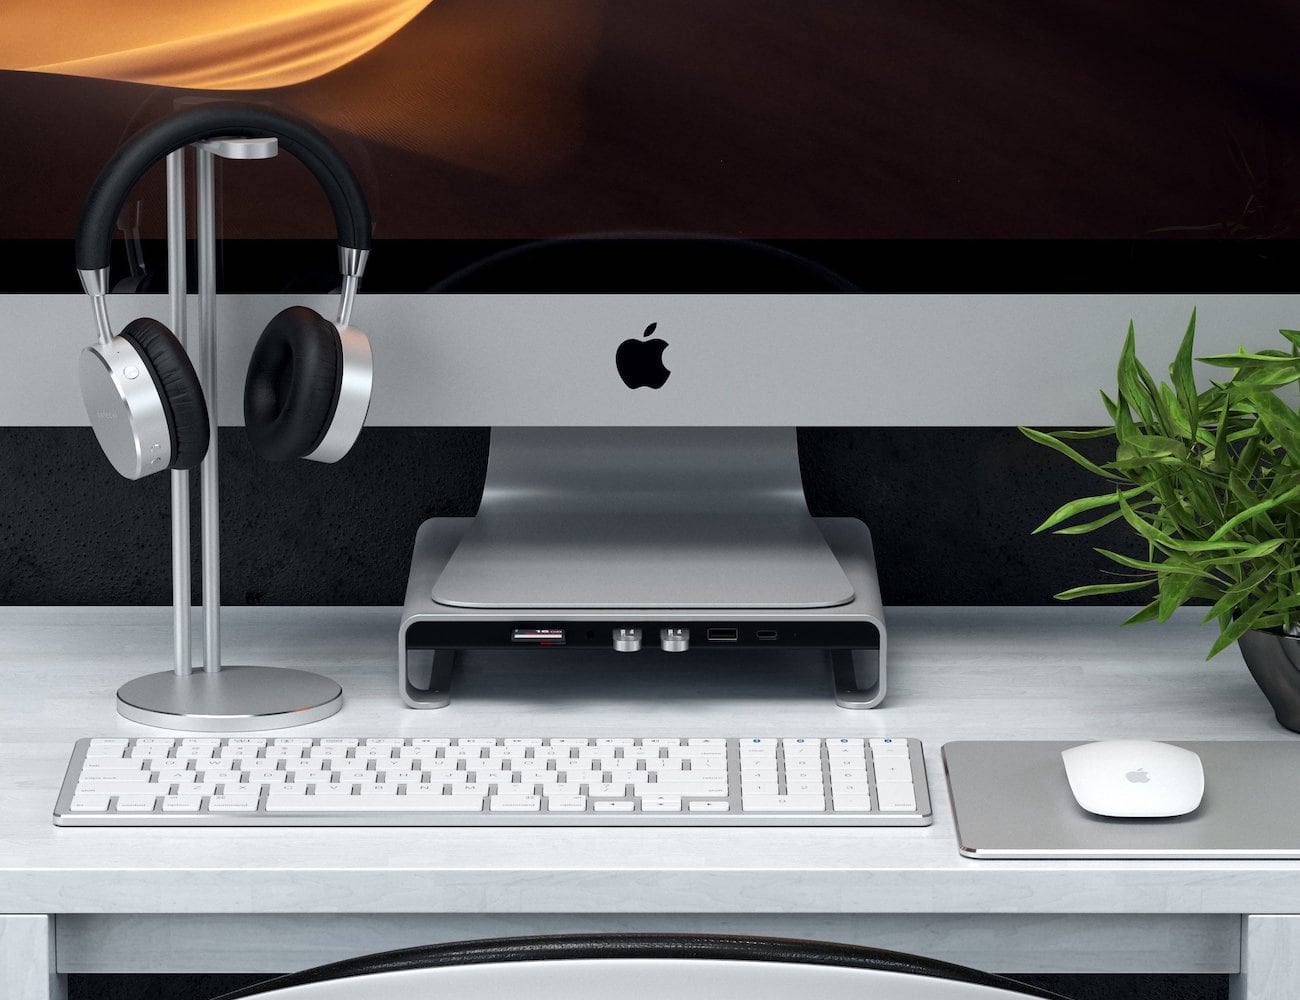 Satechi Type-C Aluminum iMac Monitor Stand Hub gives you total access